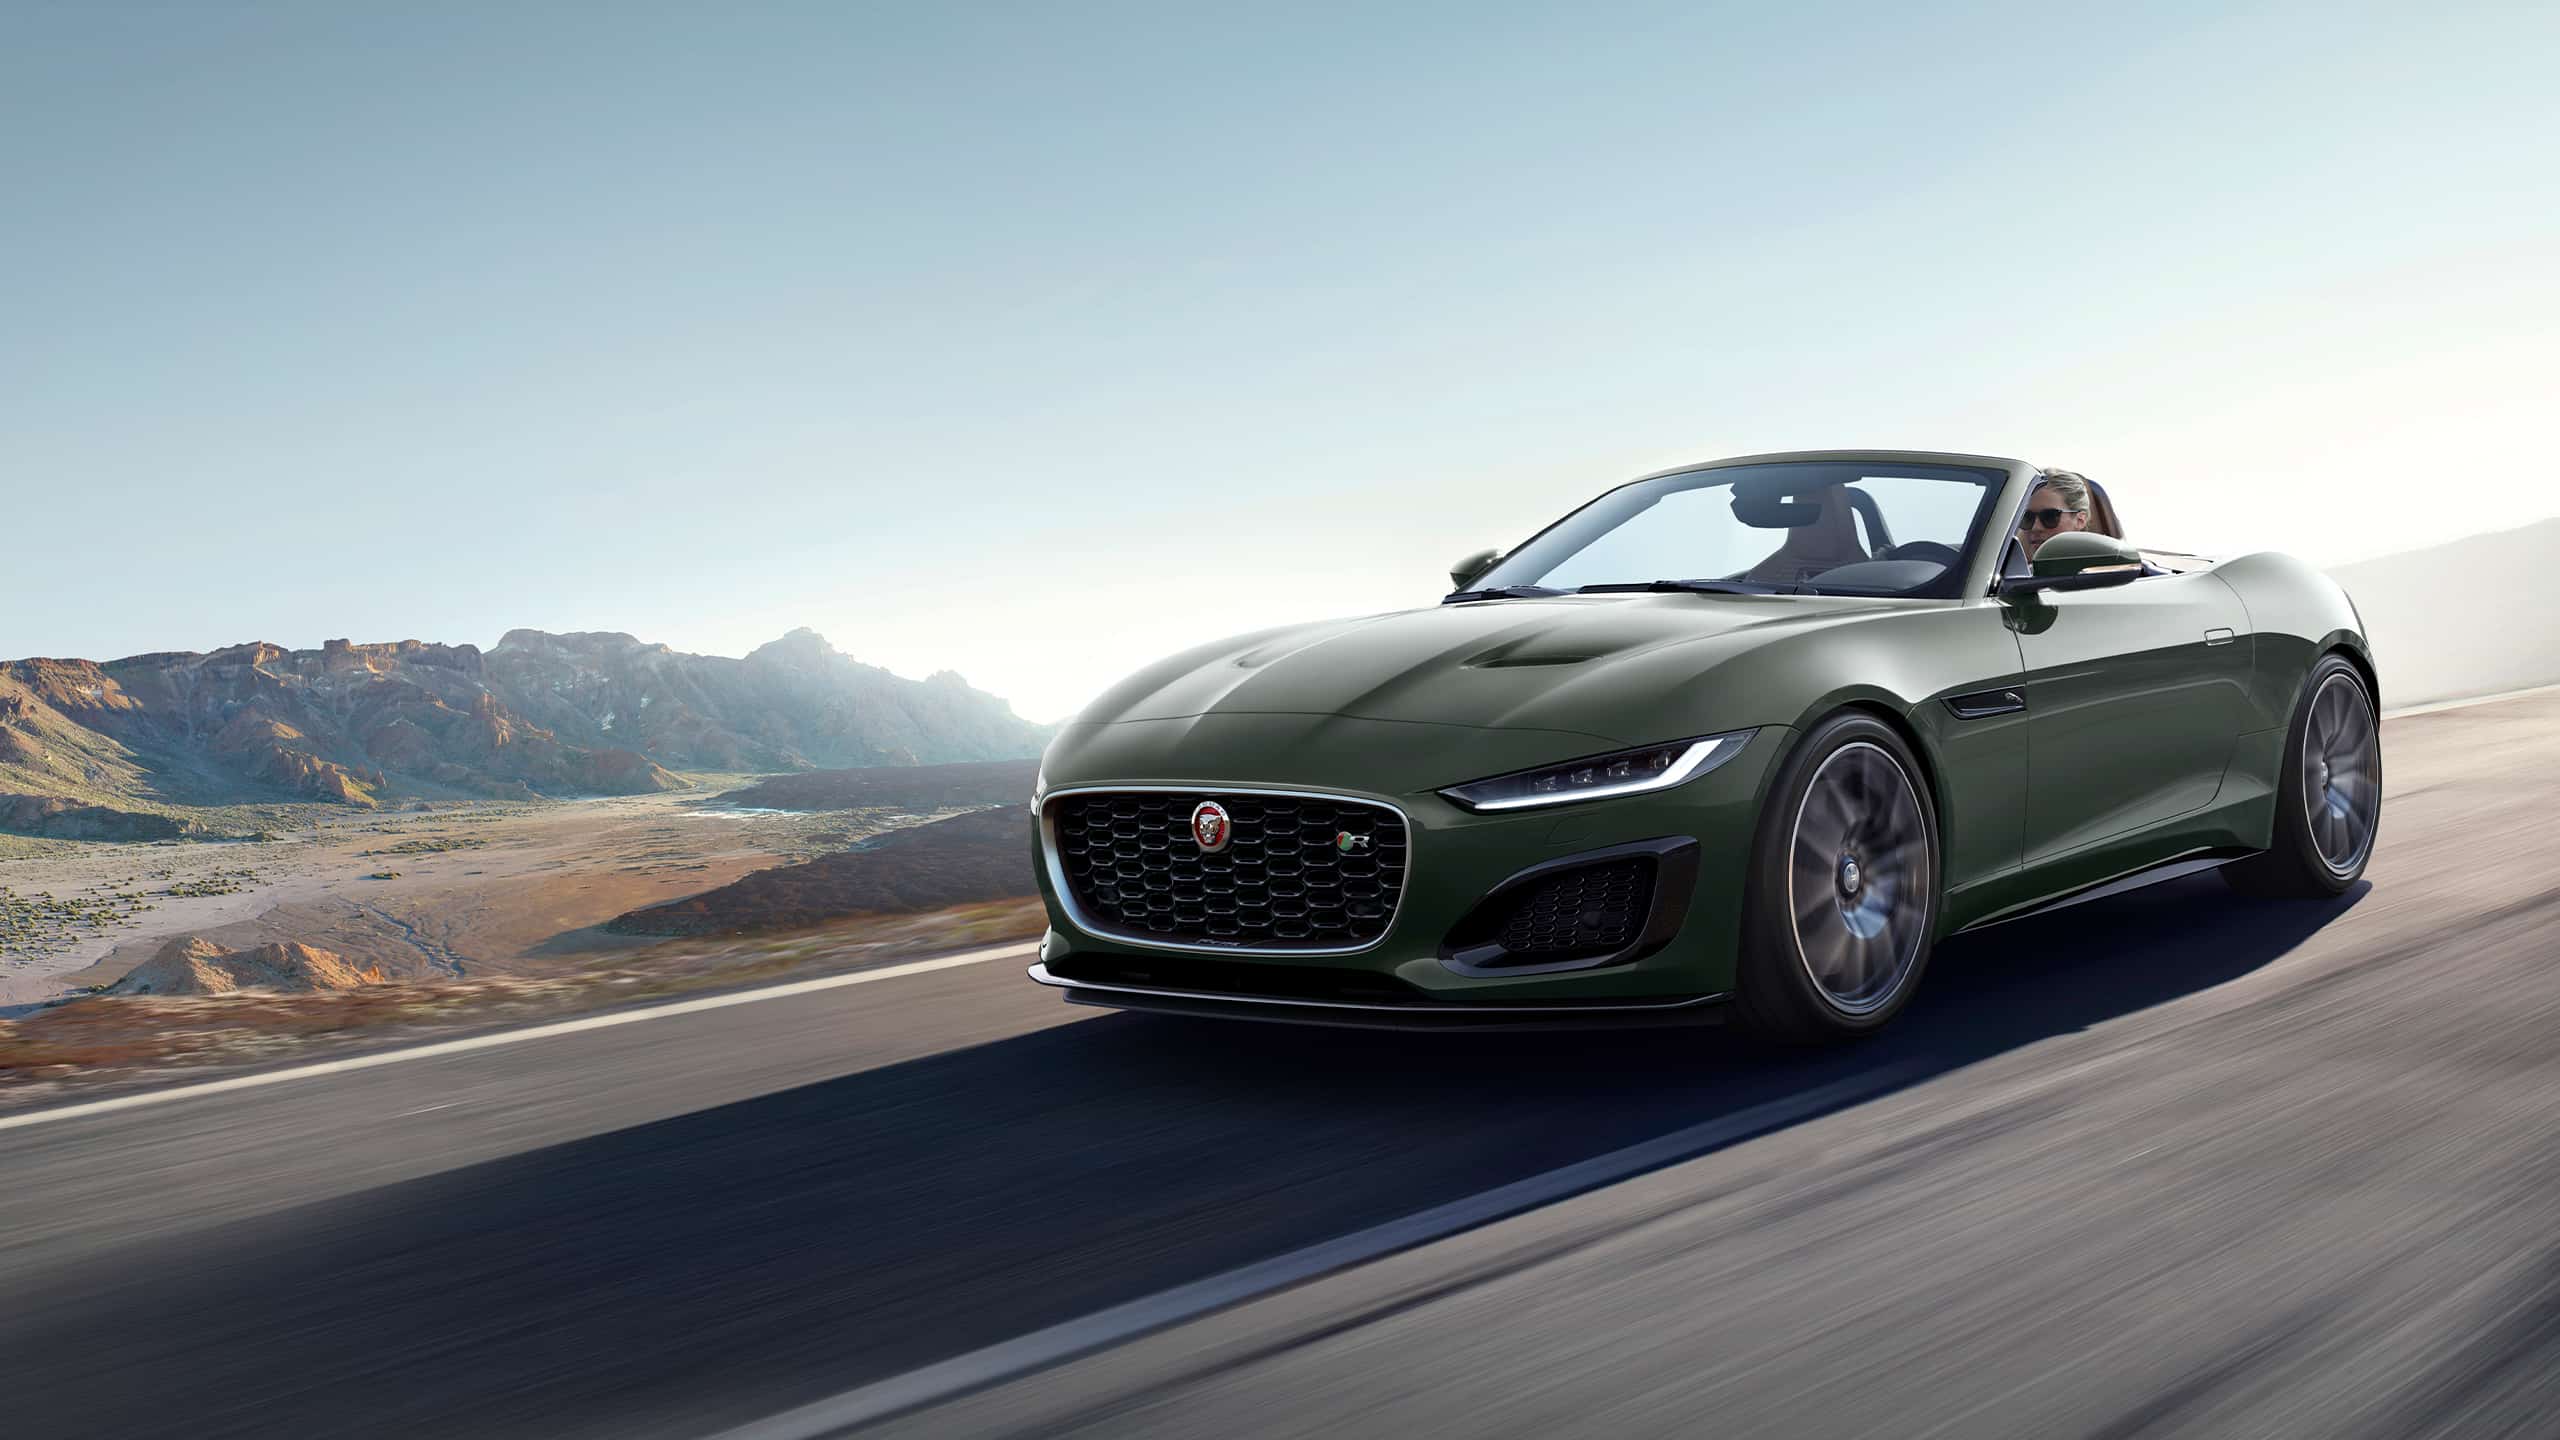 Jaguar F-Type Heritage 60 moving on the road